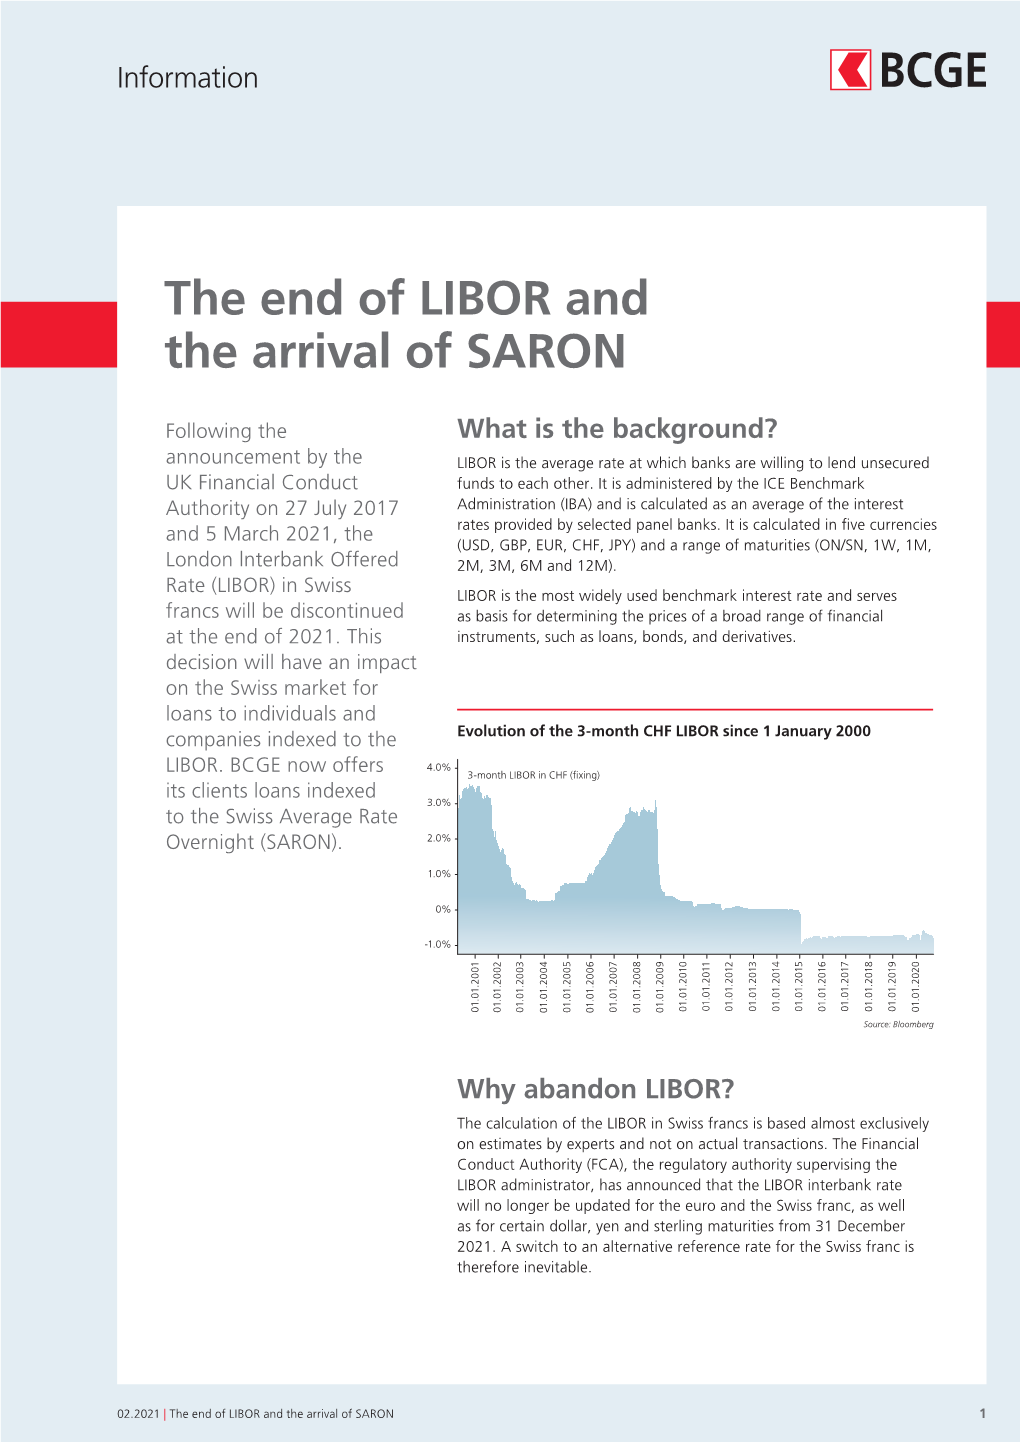 The End of LIBOR and the Arrival of SARON